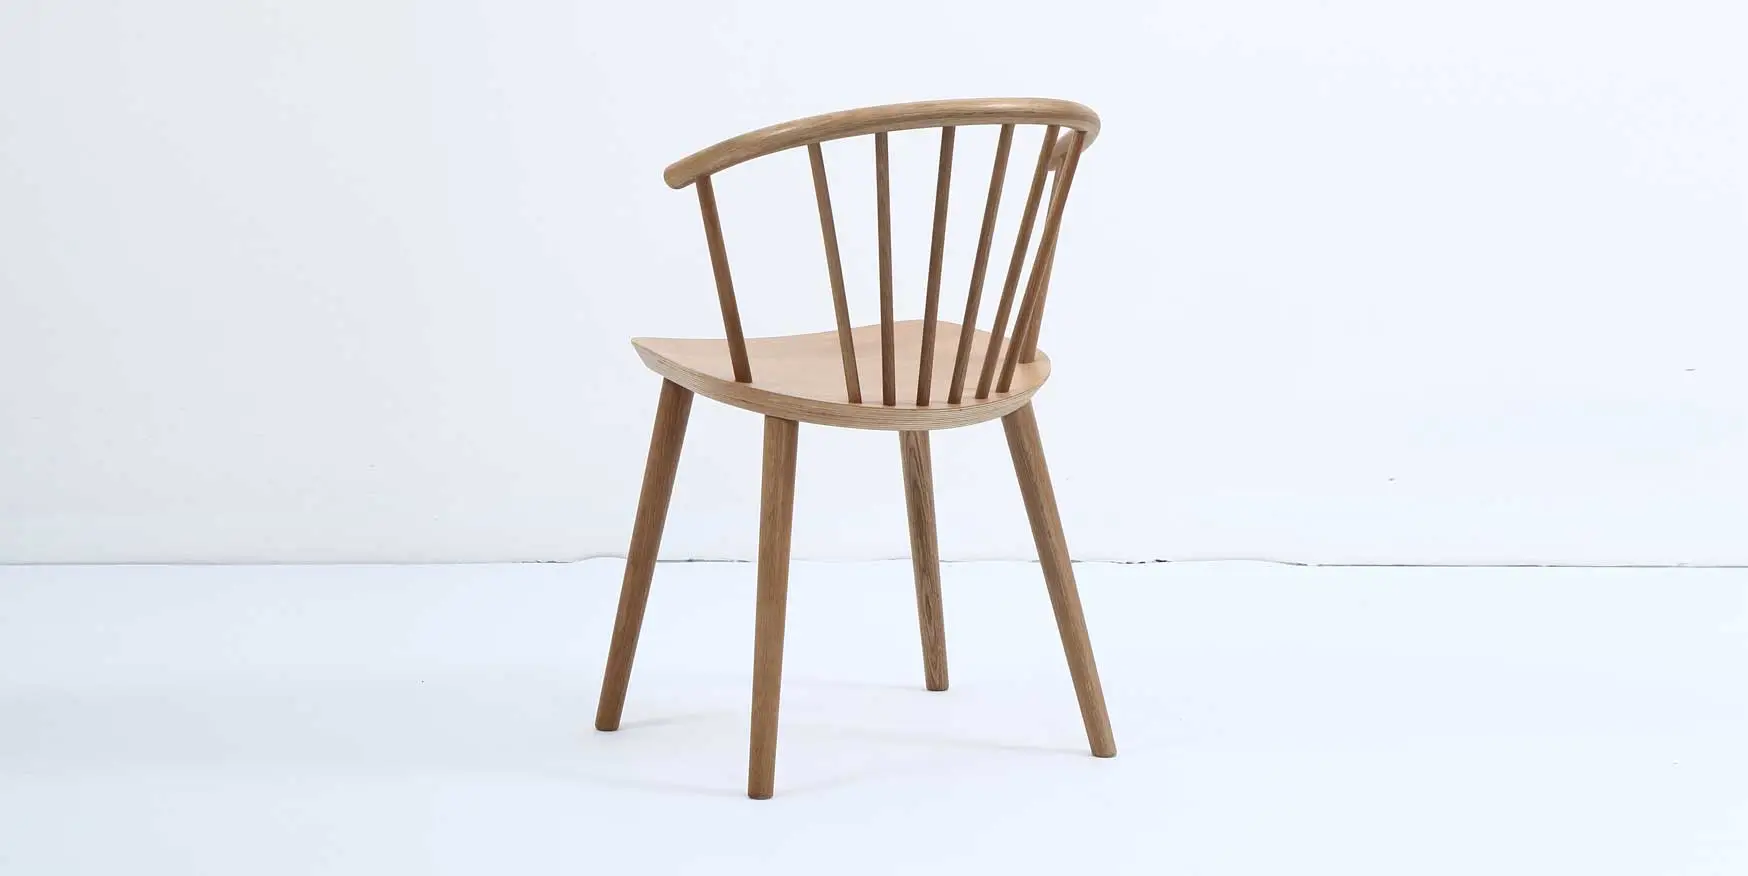 bespoke dining chairs